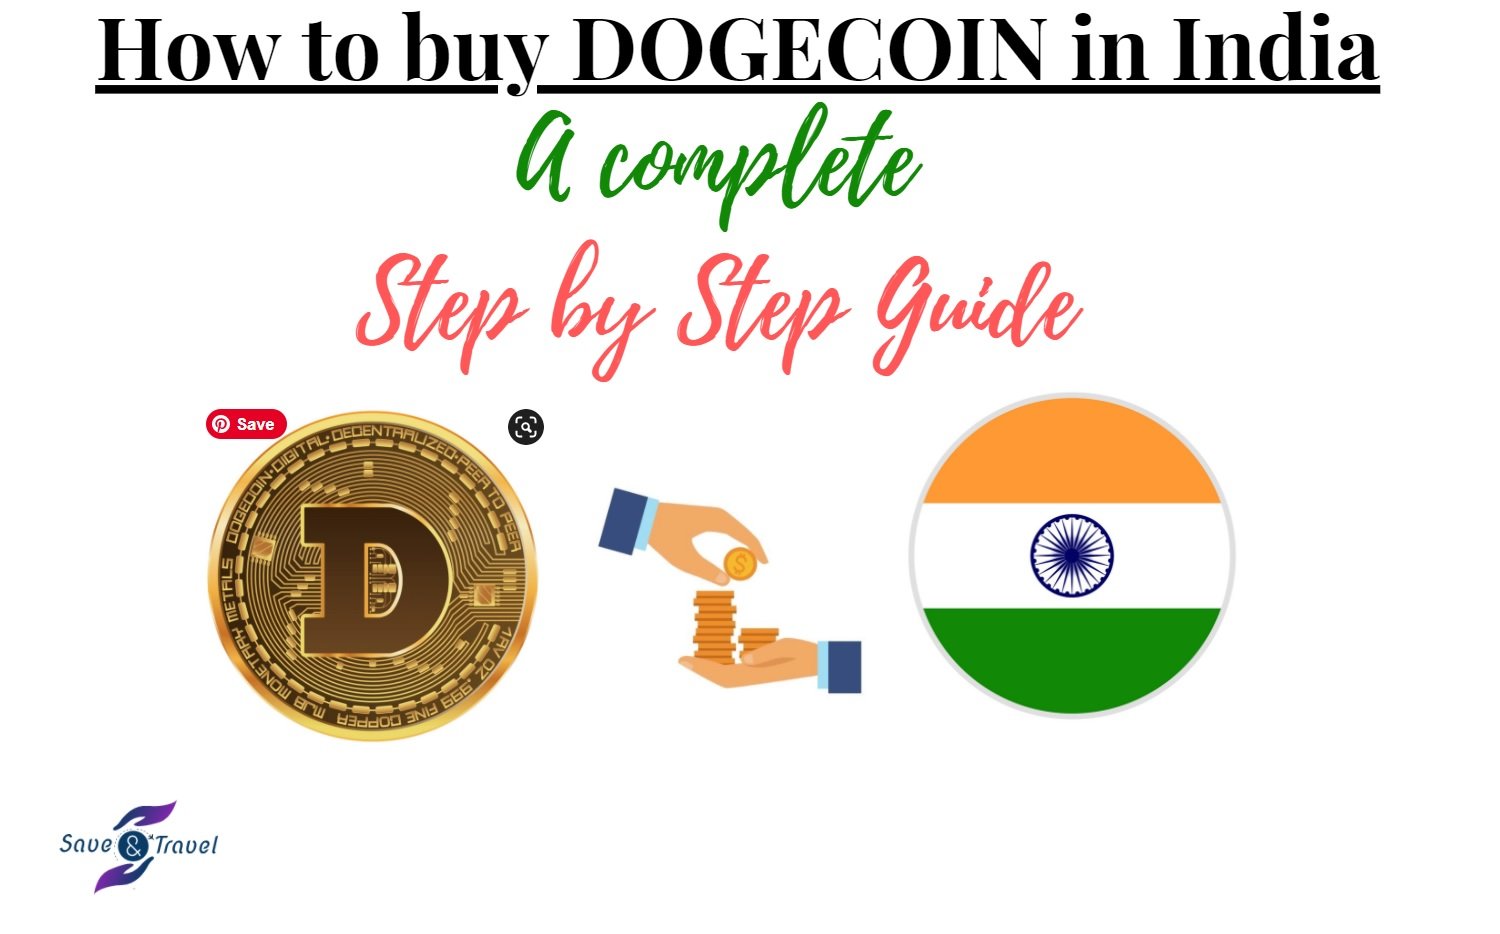 How to buy DOGECOIN in India